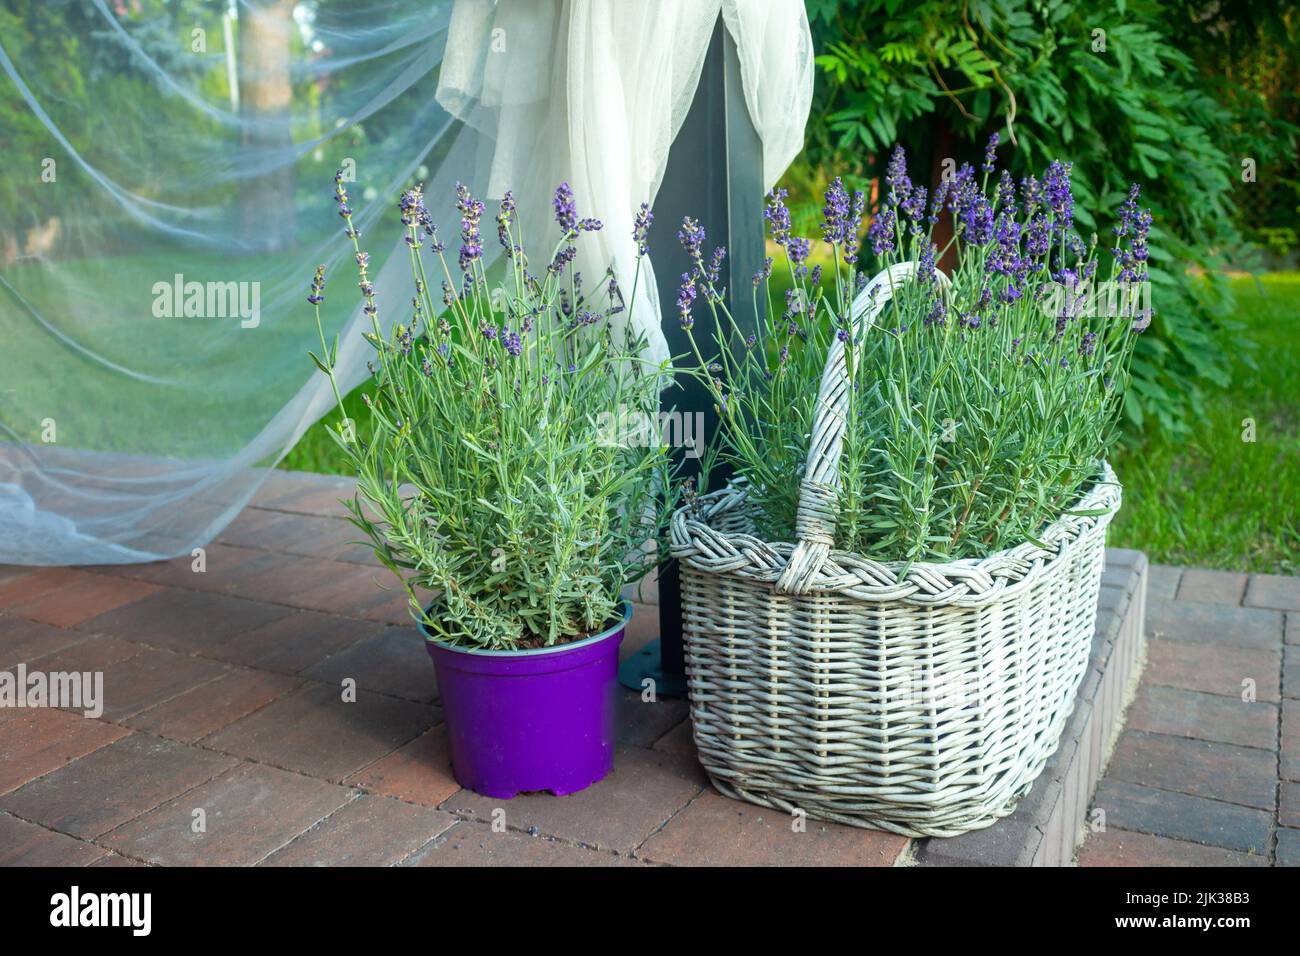 Lavender in a pot and decorative basket in the garden Stock Photo